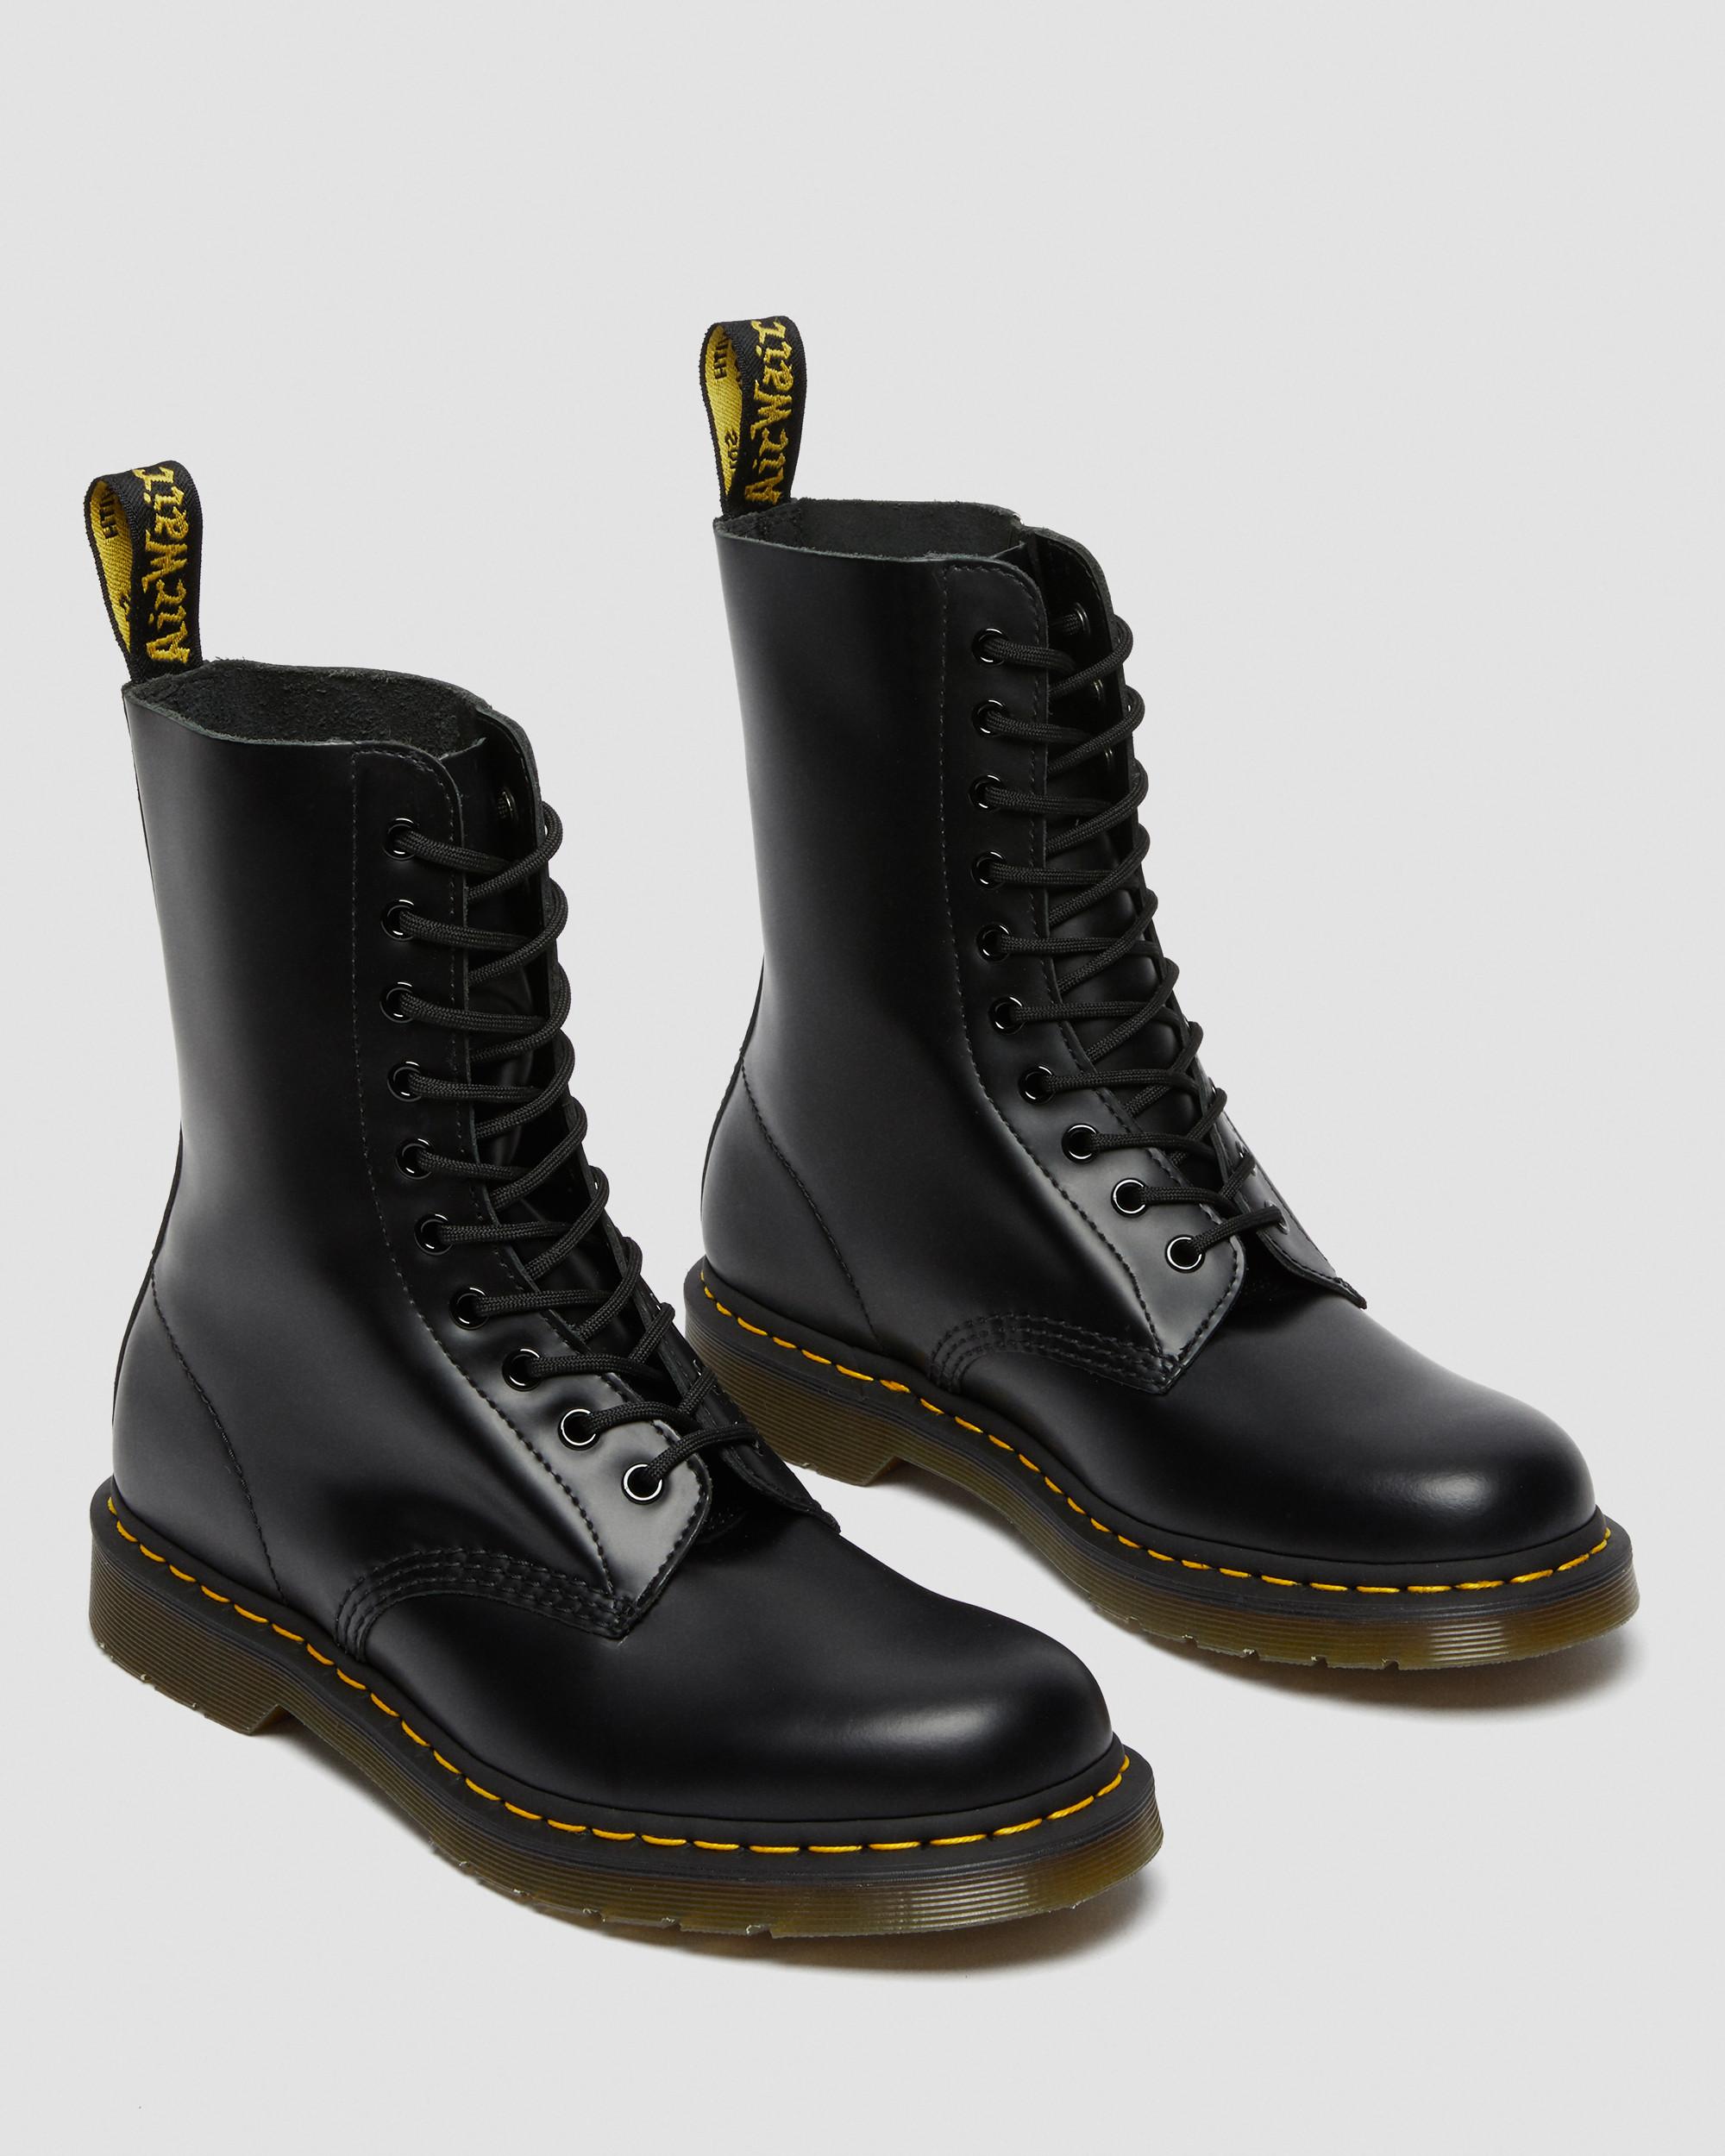 1490 Smooth Leather Mid Calf Boots, Black | Dr. Martens